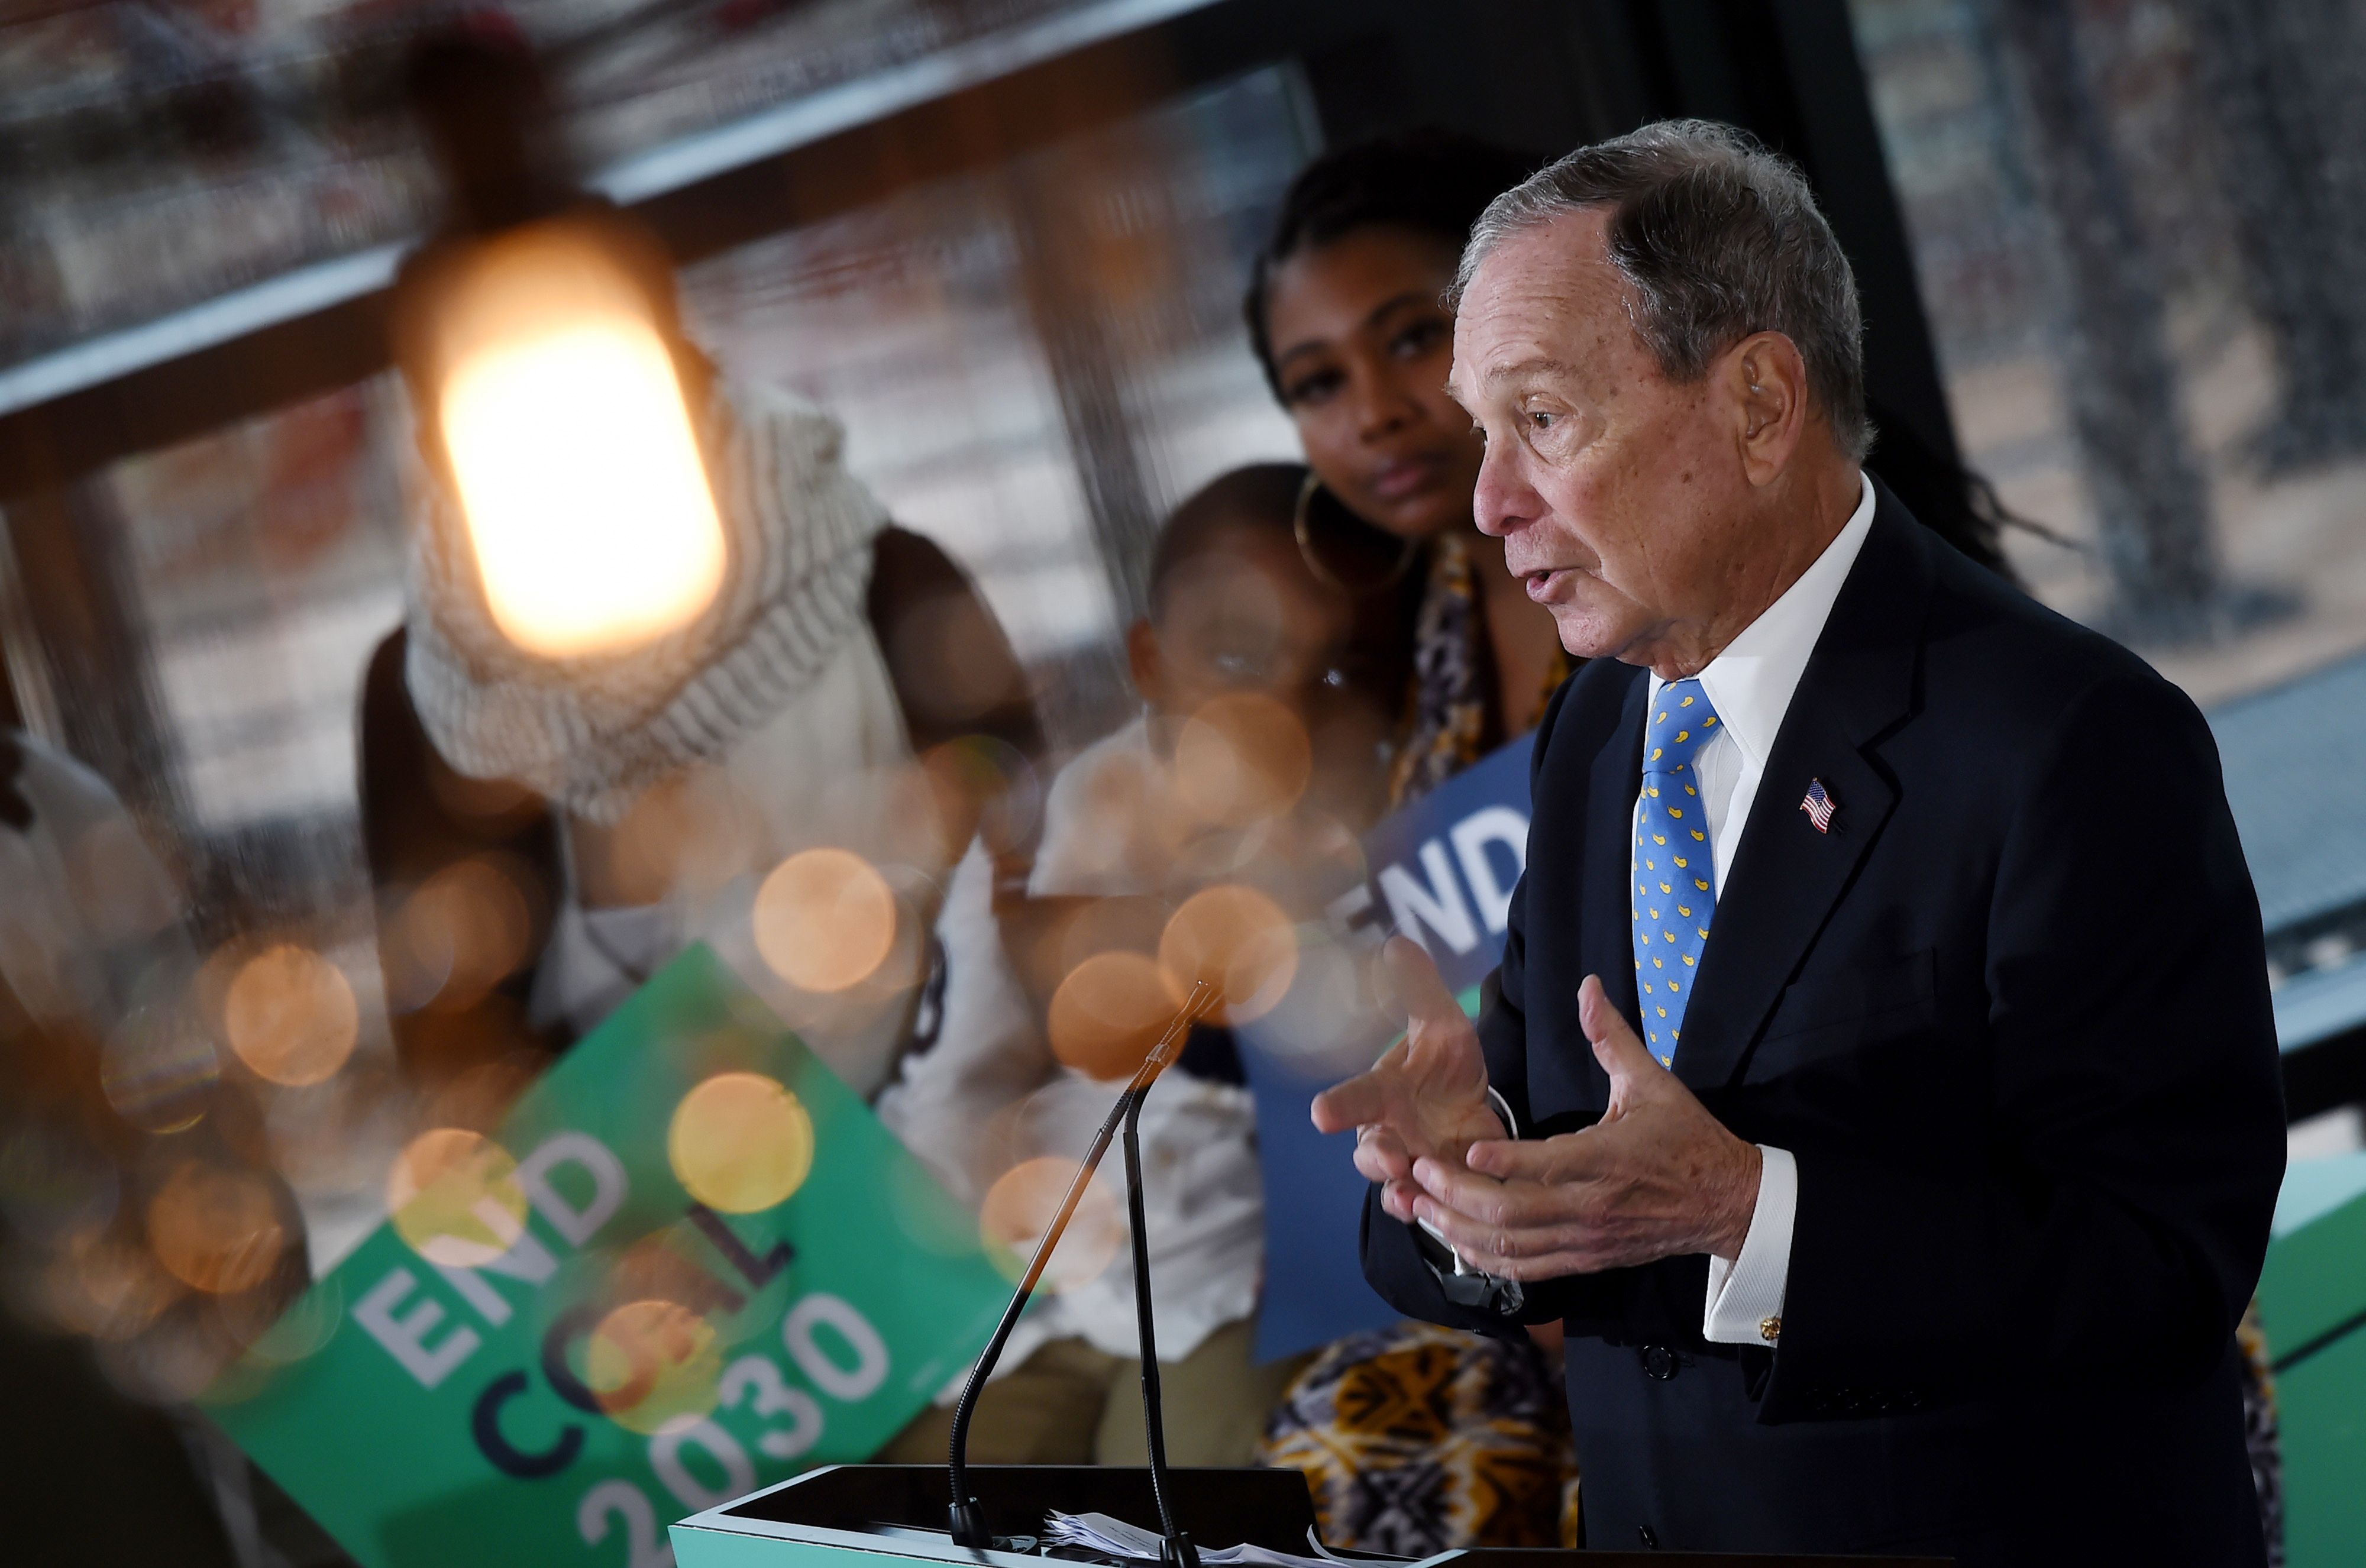 Former New York Mayor and Democratic presidential candidate Michael Bloomberg speaks about his plan for clean energy during a campaign event at the Blackwall Hitch restaurant in Alexandria, Virginia on December 13, 2019. (OLIVIER DOULIERY/AFP via Getty Images)